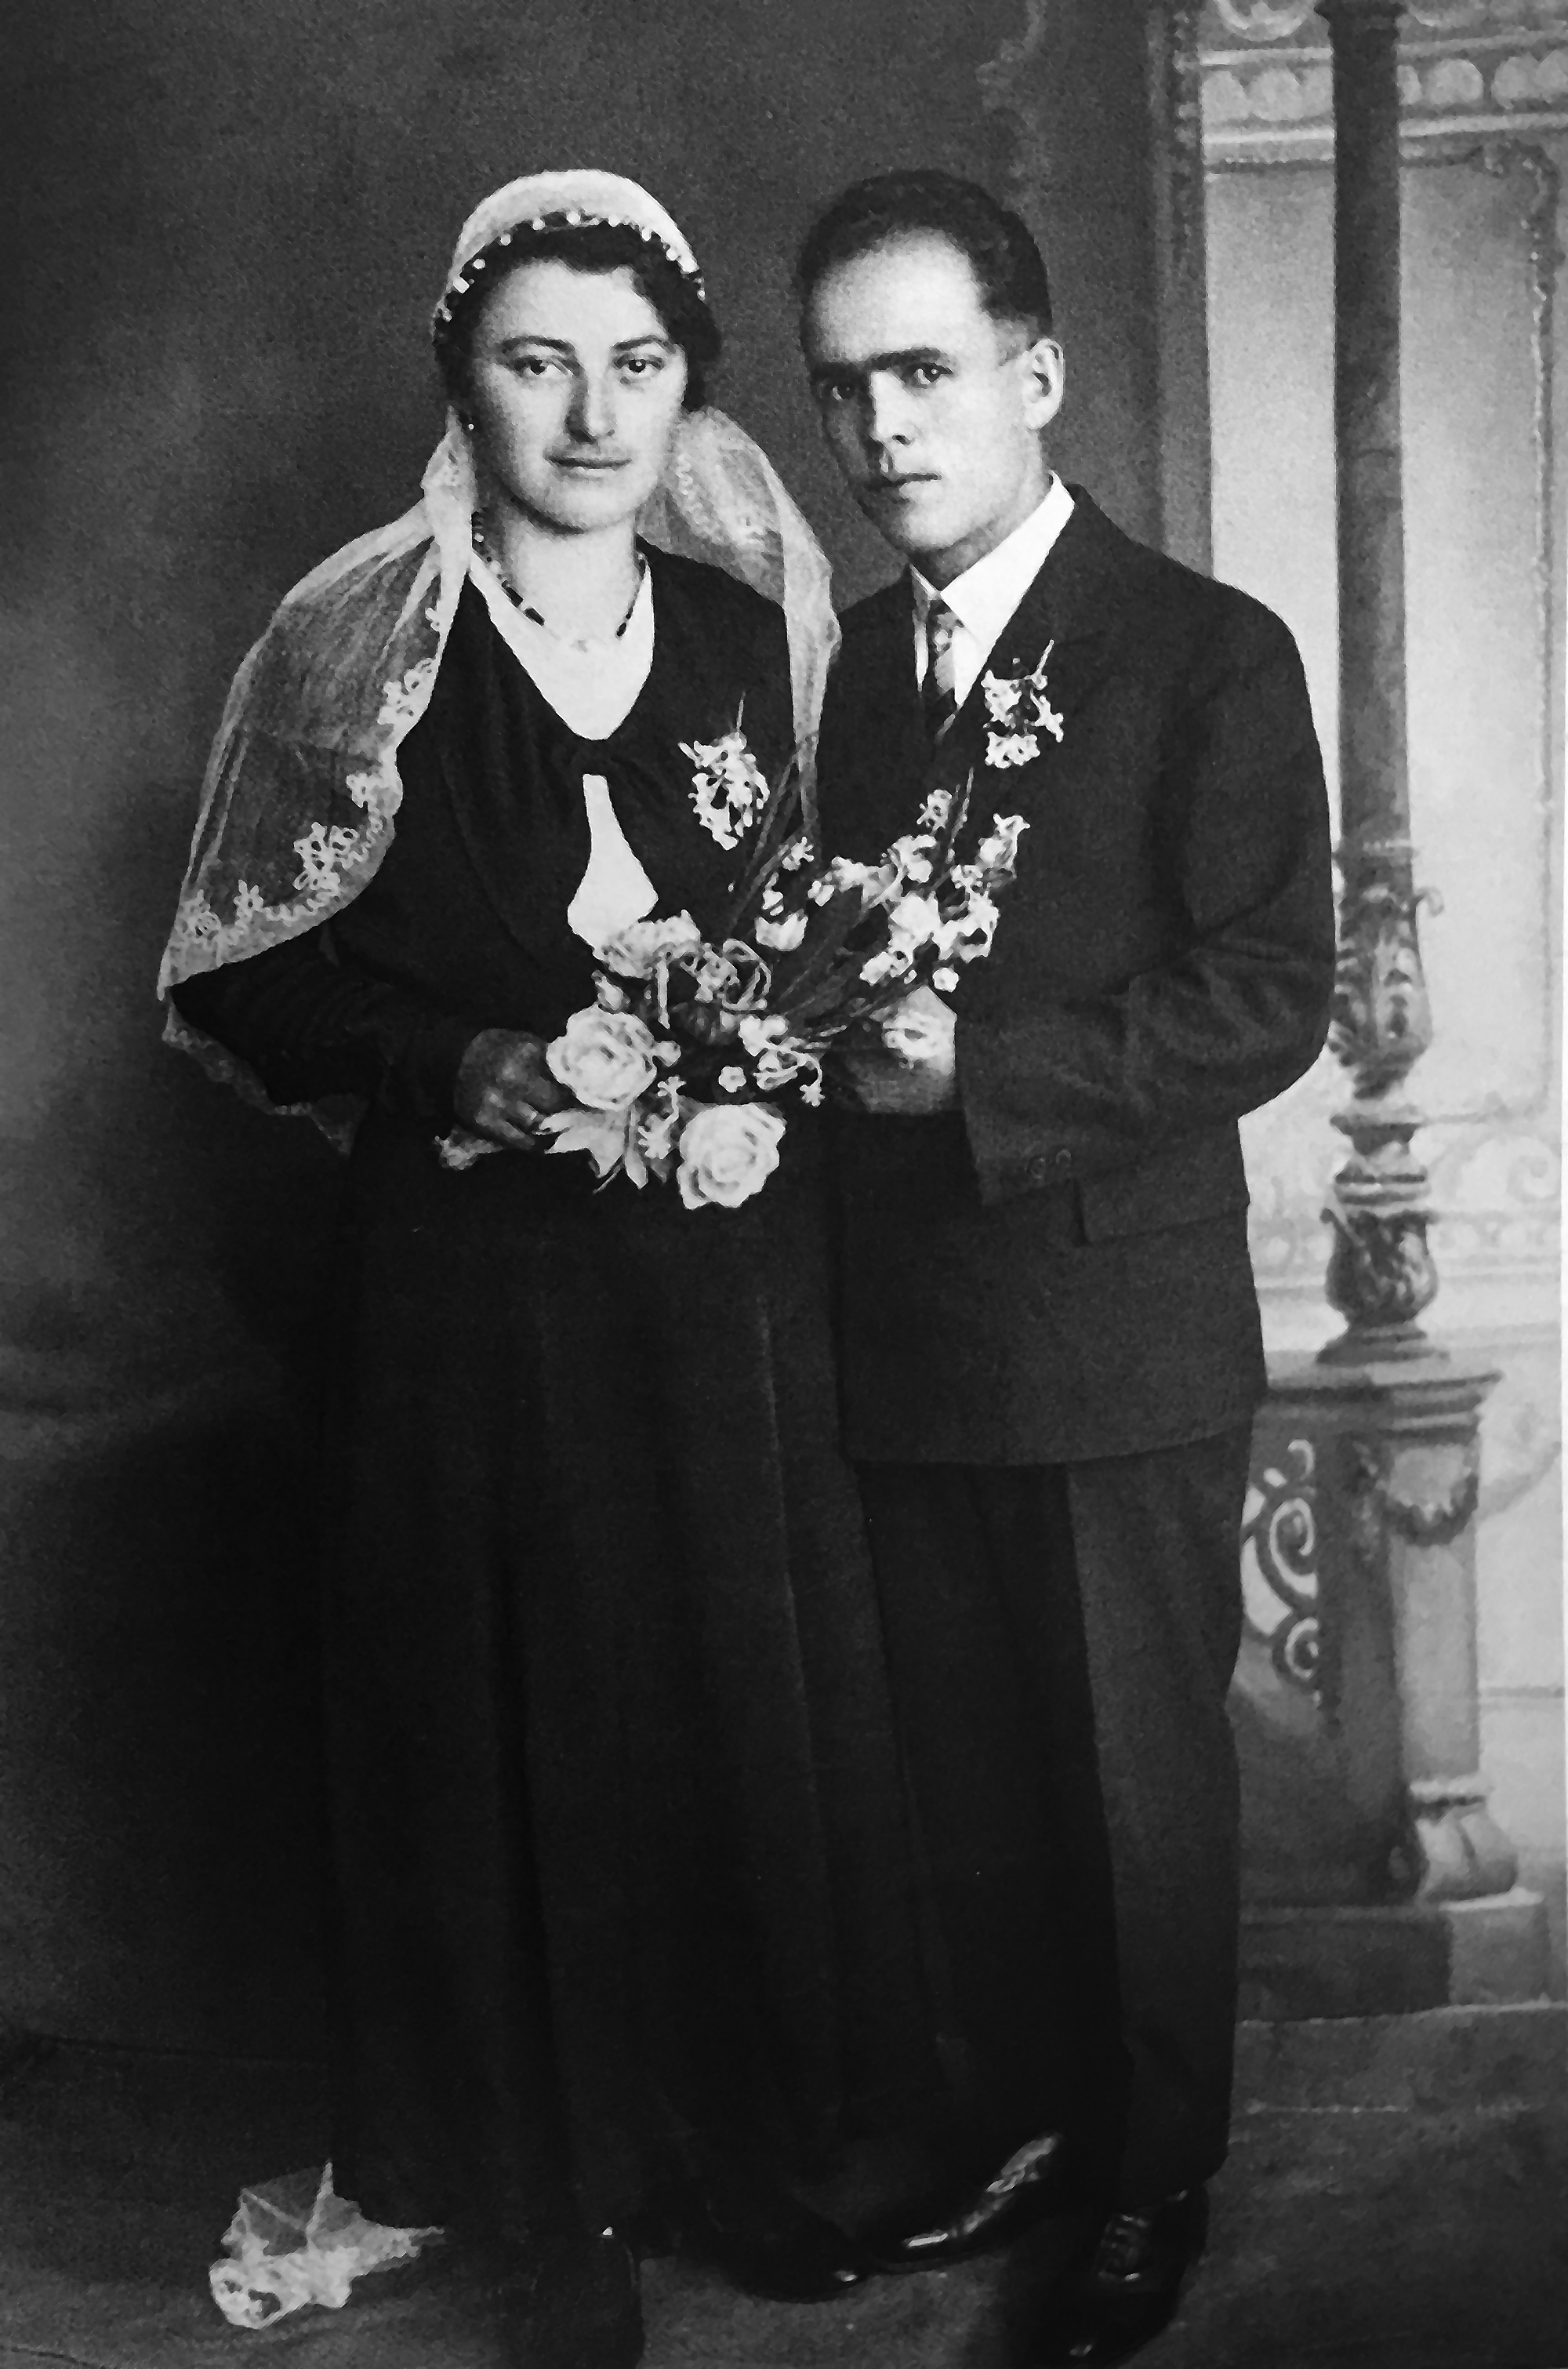 Franz and Franziska Jagerstatter after they returned from Rome, probably in April or May 1936. This is their wedding photograph./Styria Verlag. Used with permission.